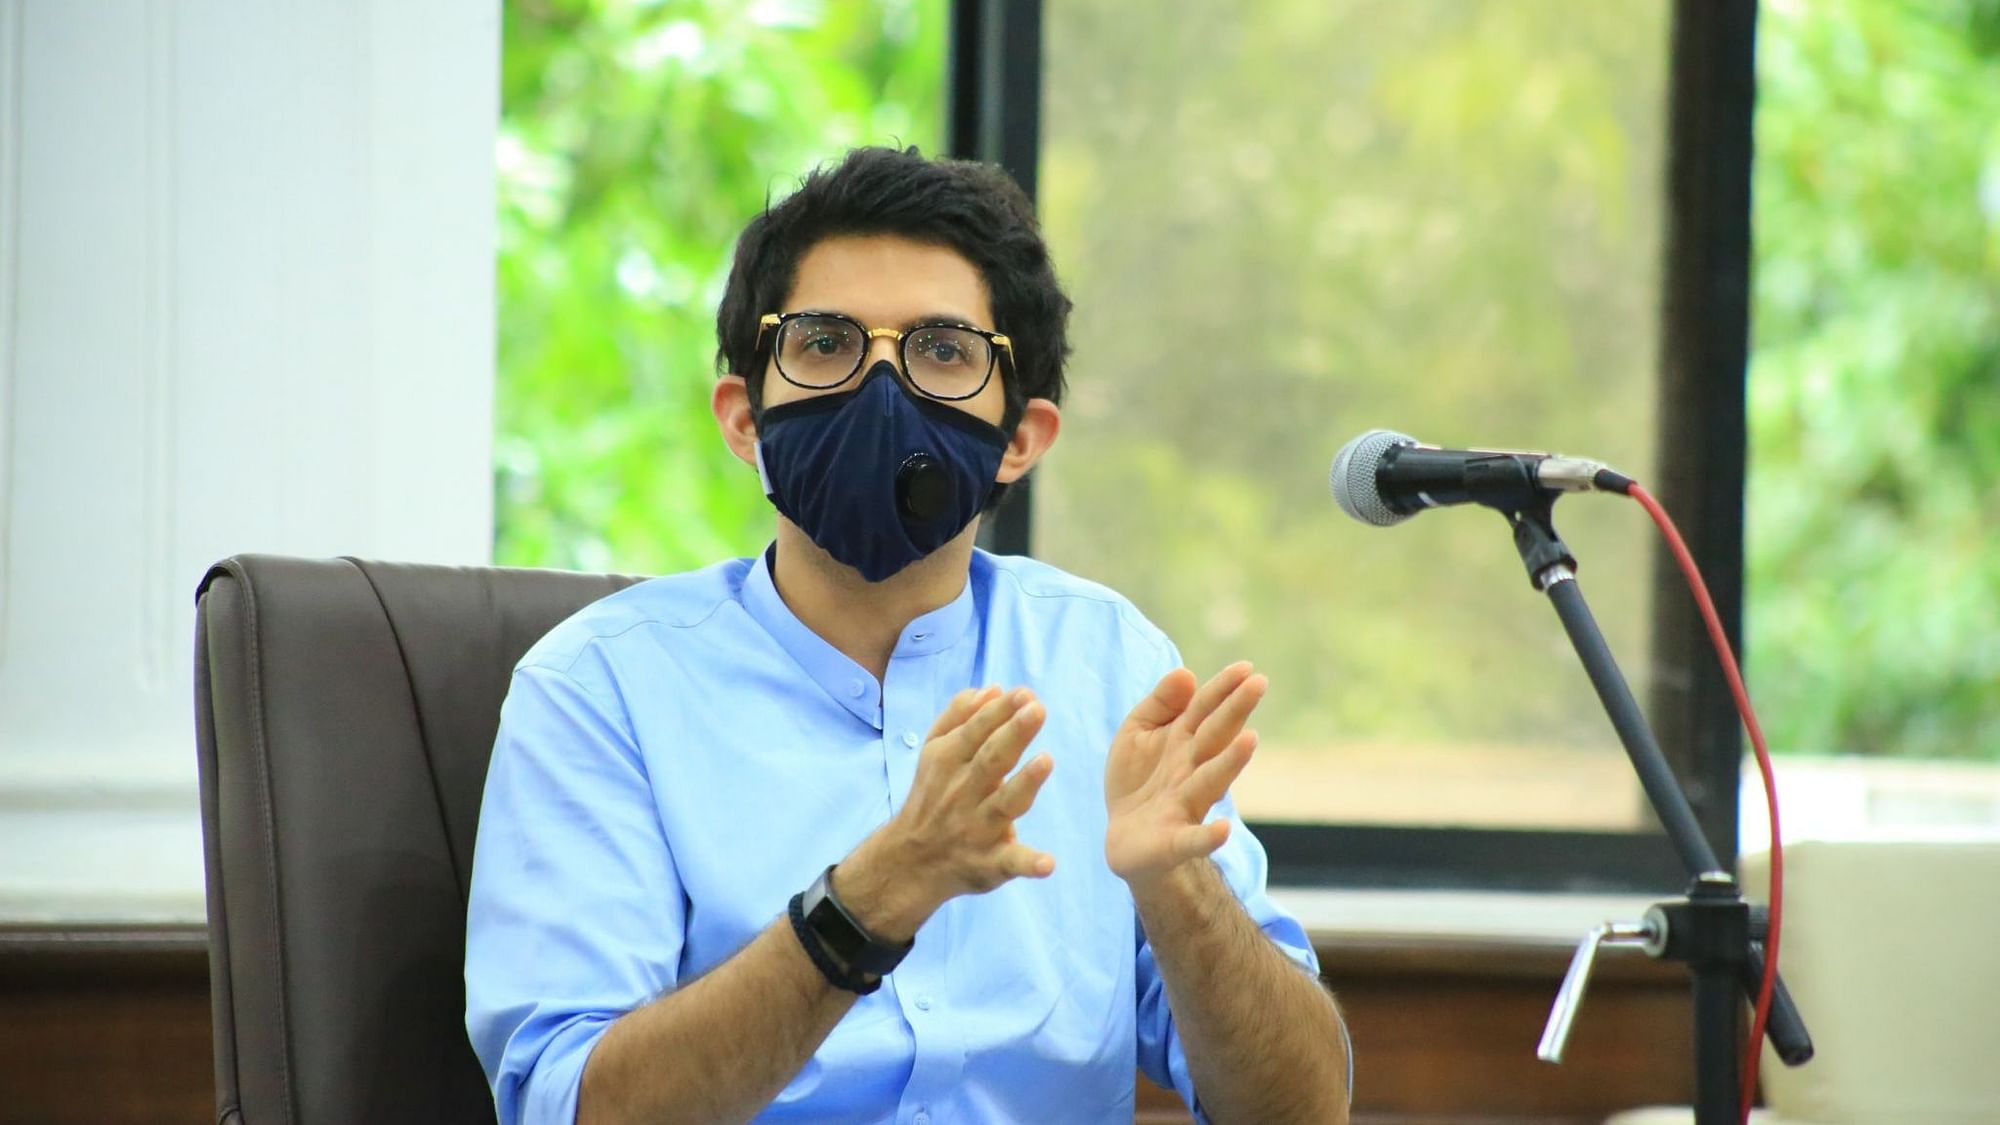 The Yuva Sena filed the petition against the decision on final-year exams under the directions of Aaditya Thackeray.